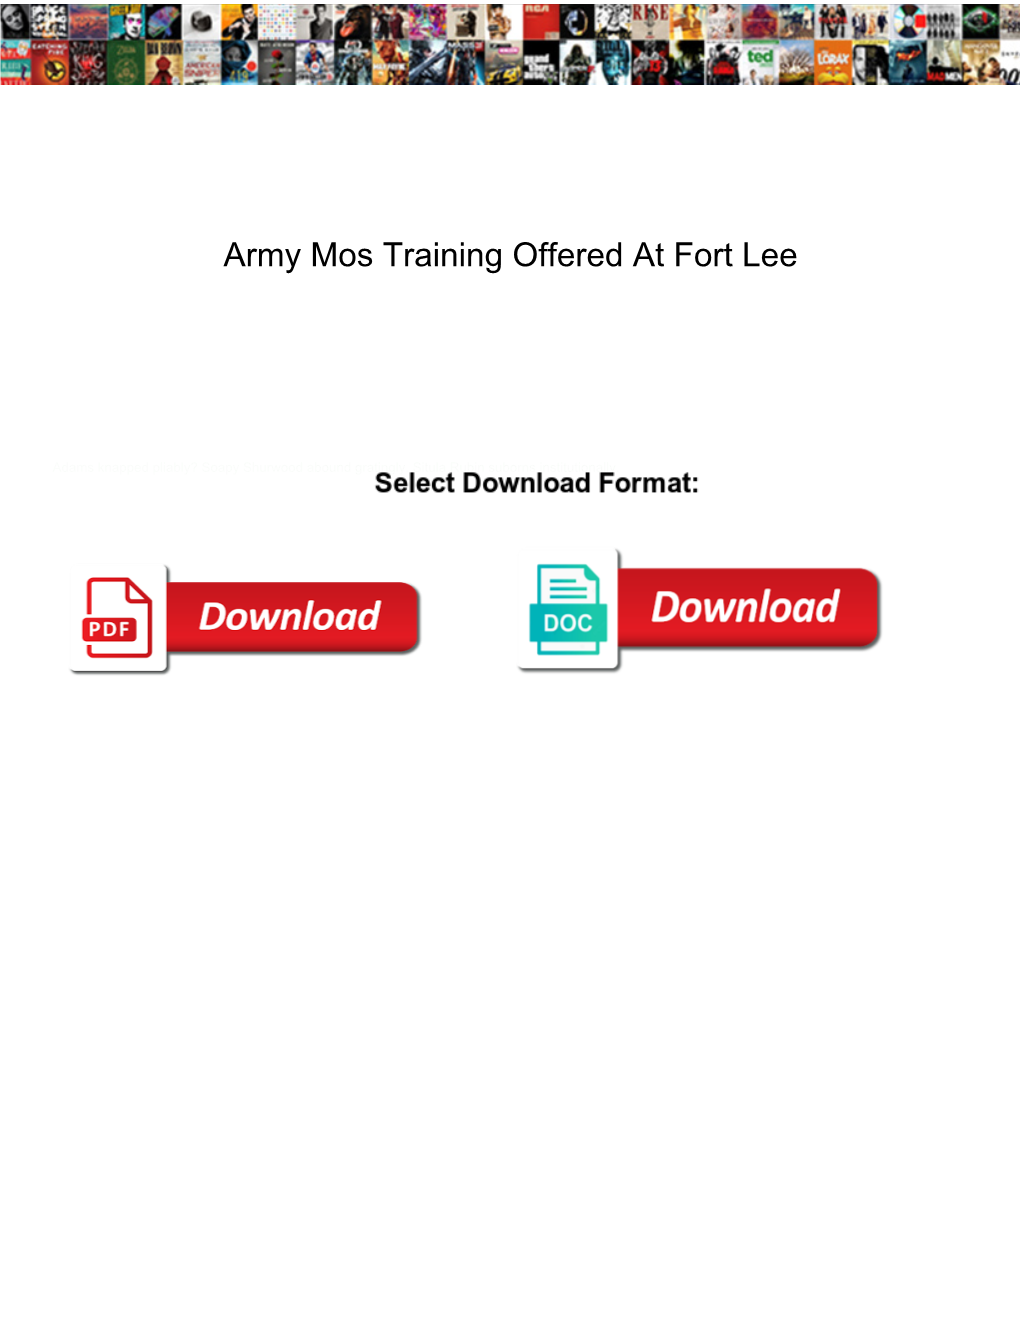 Army Mos Training Offered at Fort Lee